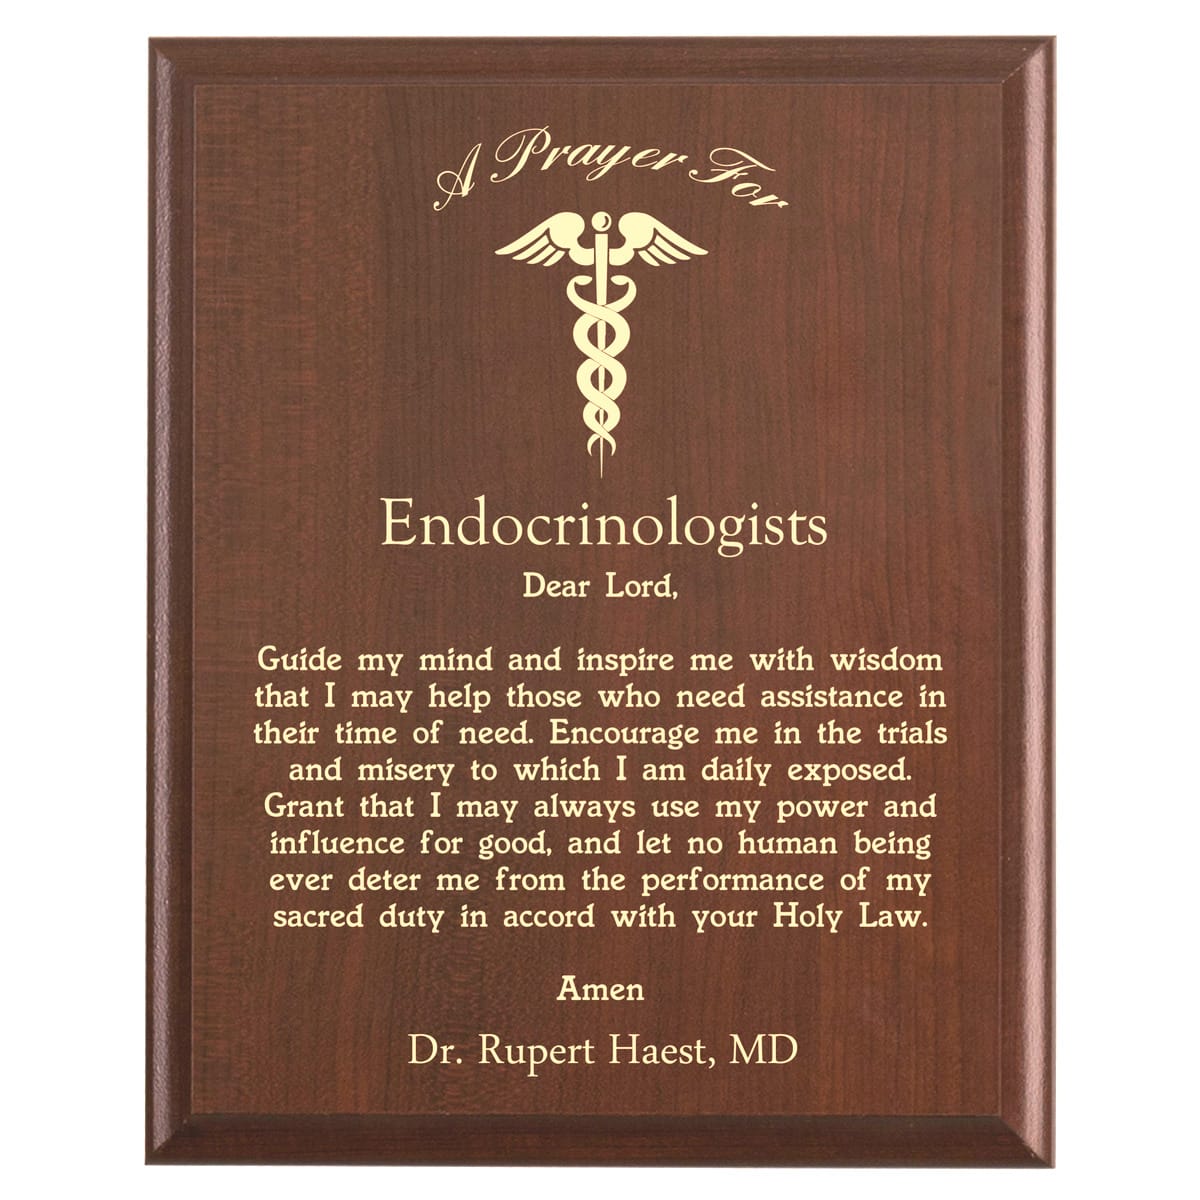 Plaque photo: Endocrinologists Prayer Plaque design with free personalization. Wood style finish with customized text.